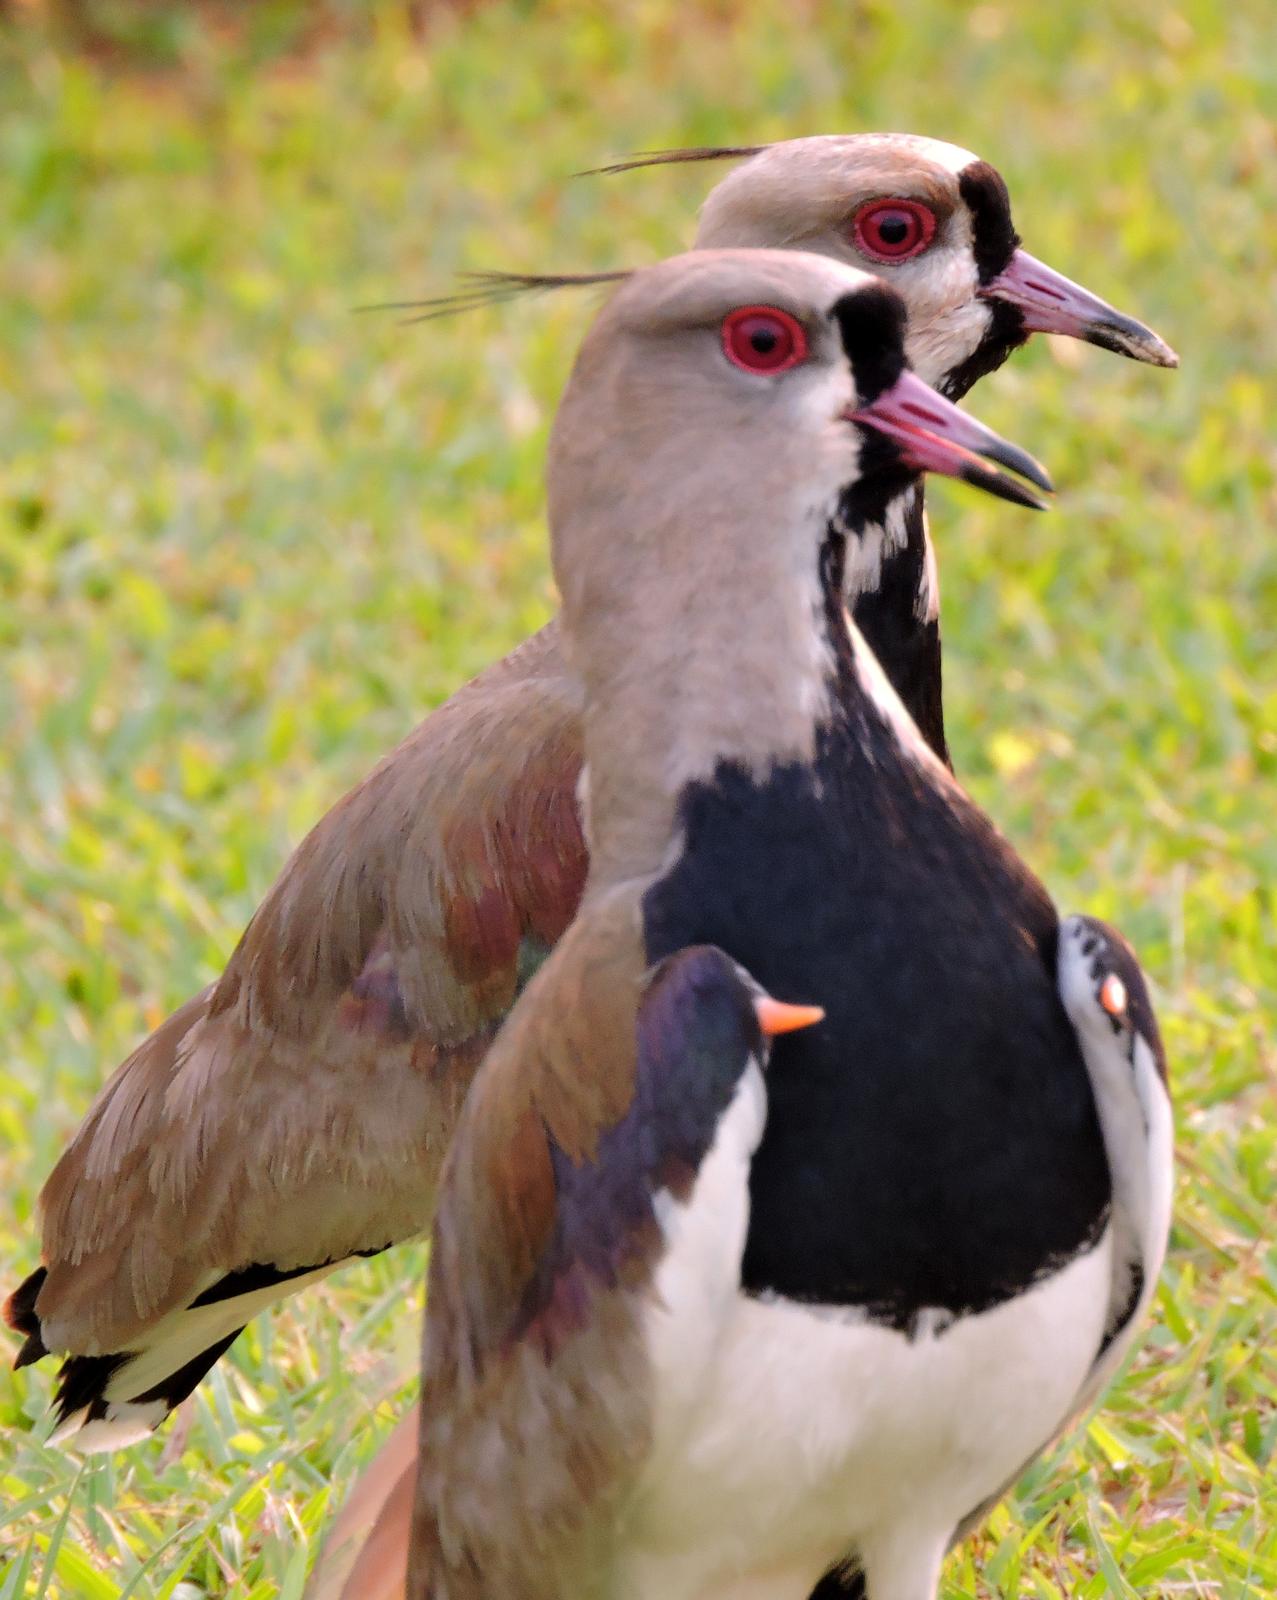 Southern Lapwing Photo by Peter Lowe